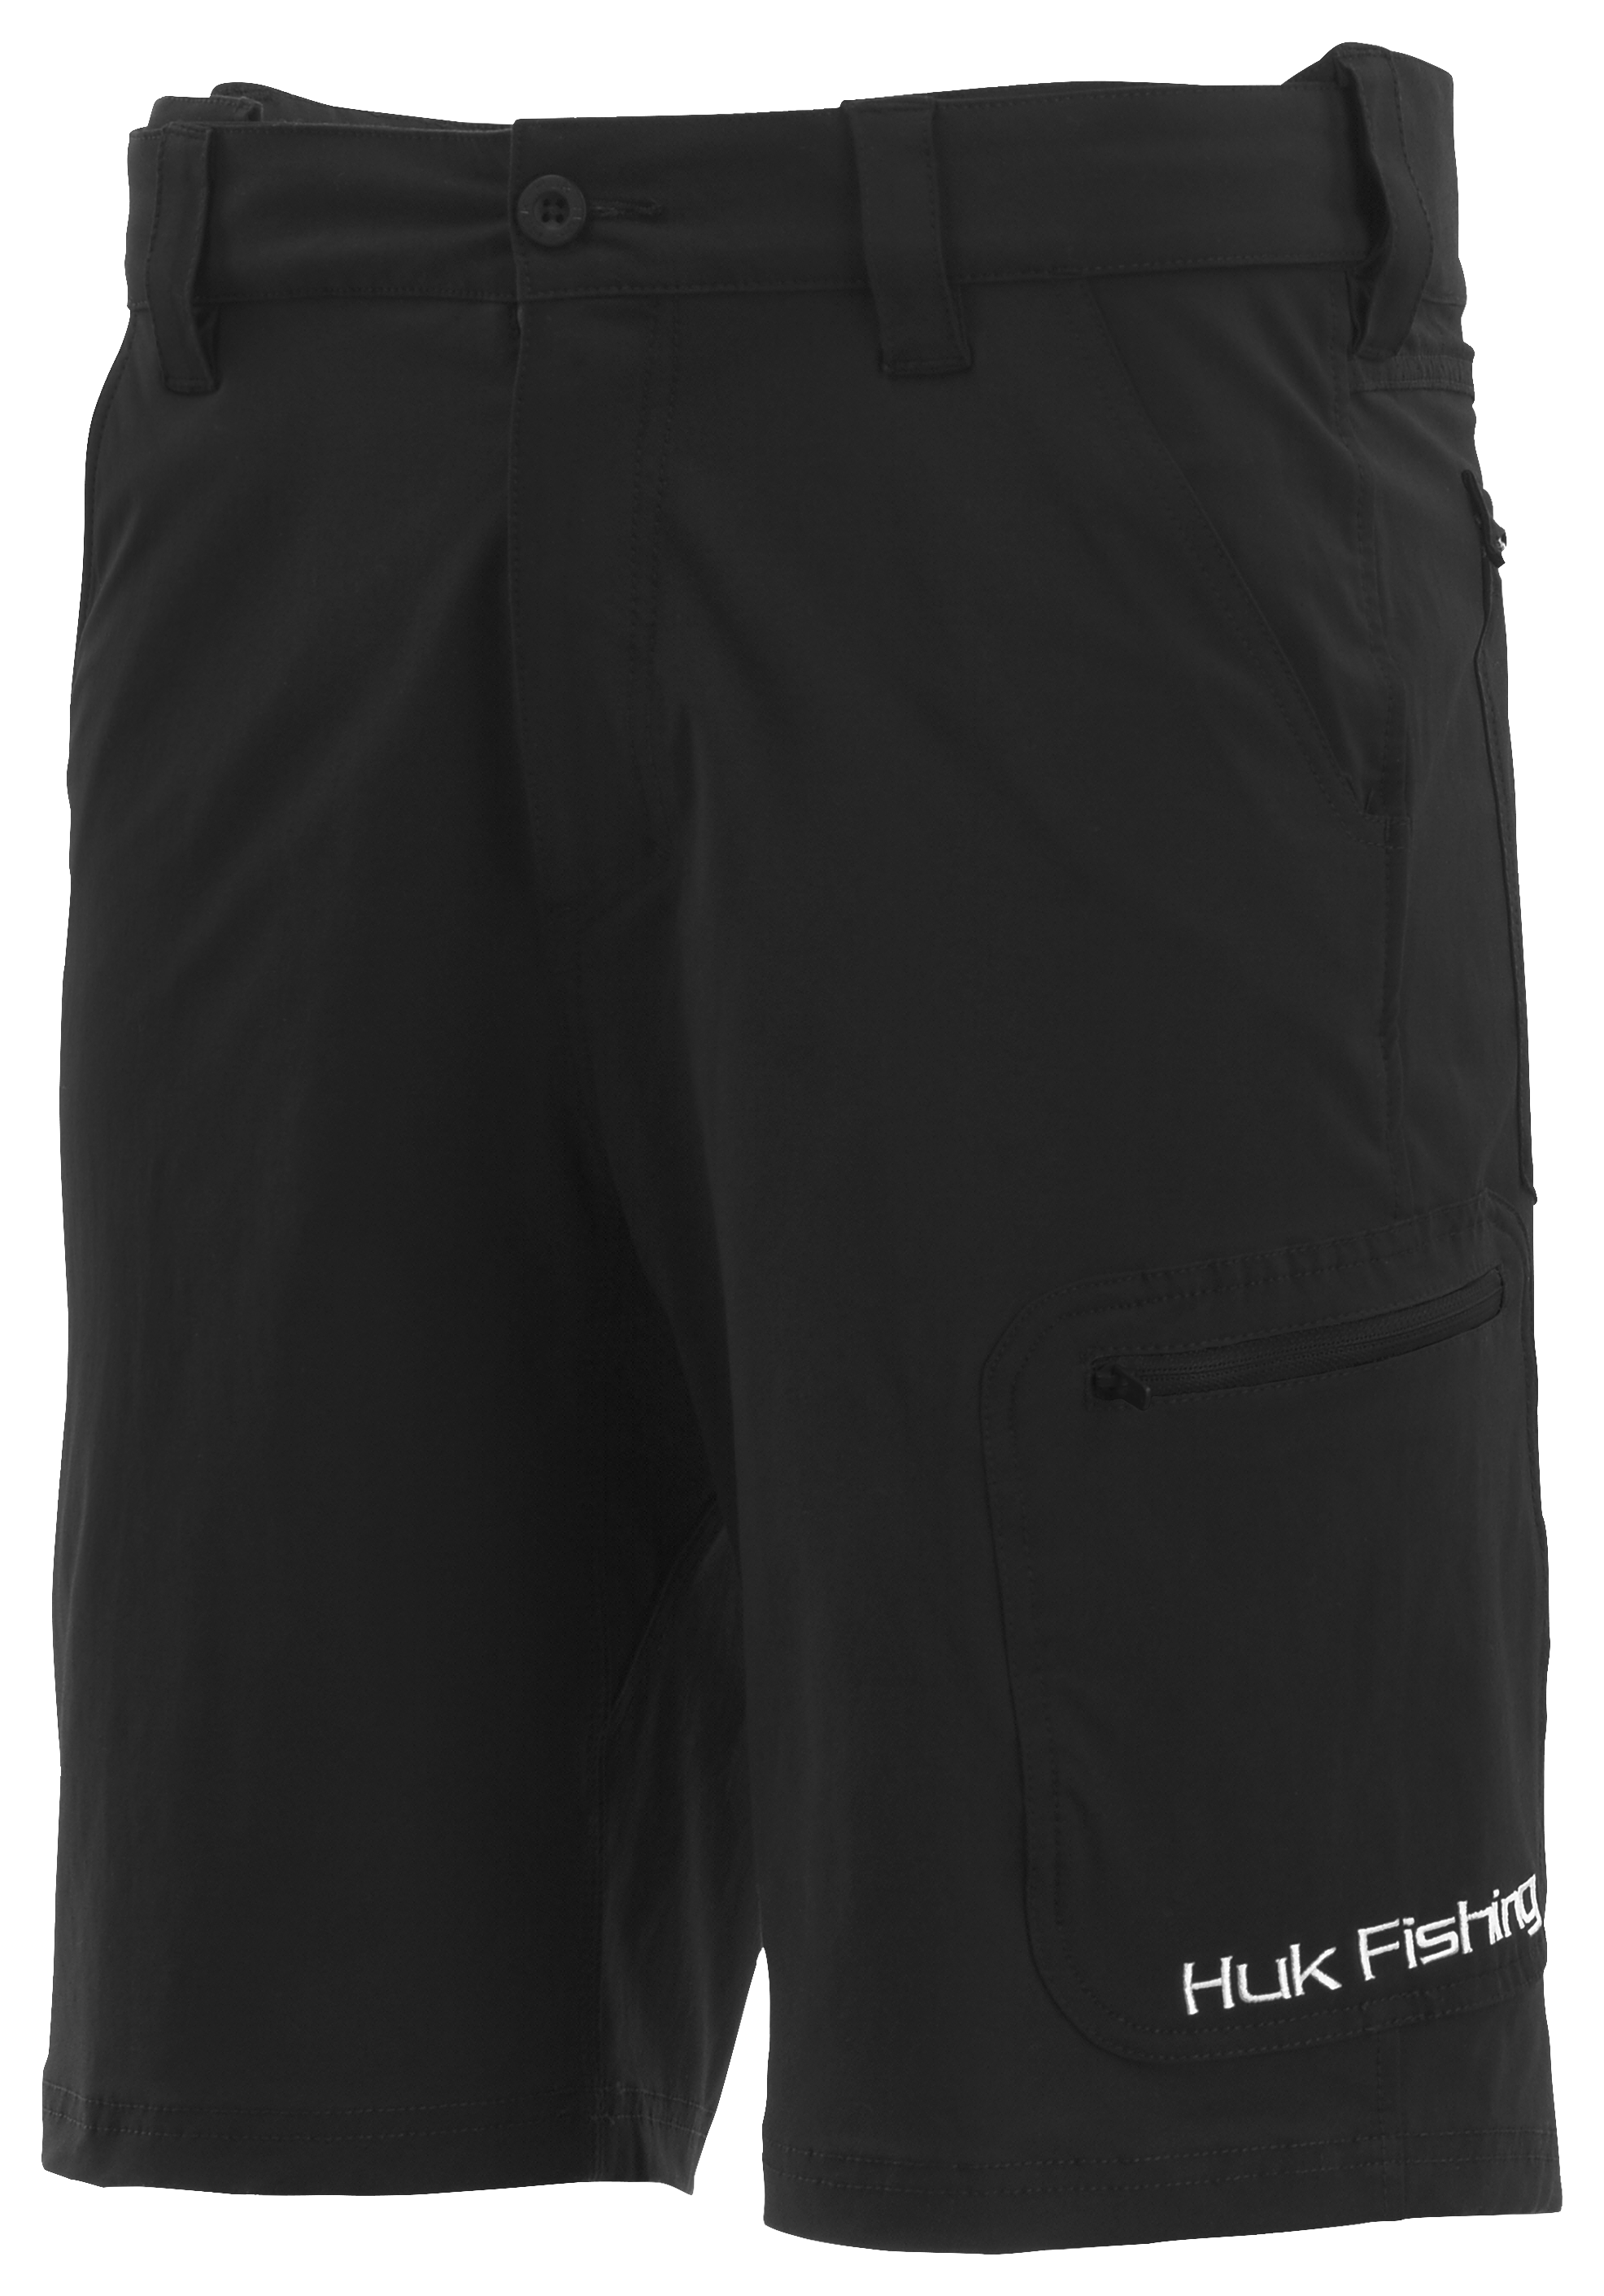 Huk Mens Performance Fishing Shorts Small Vented 9” Inseam Pockets Stretch  X-14